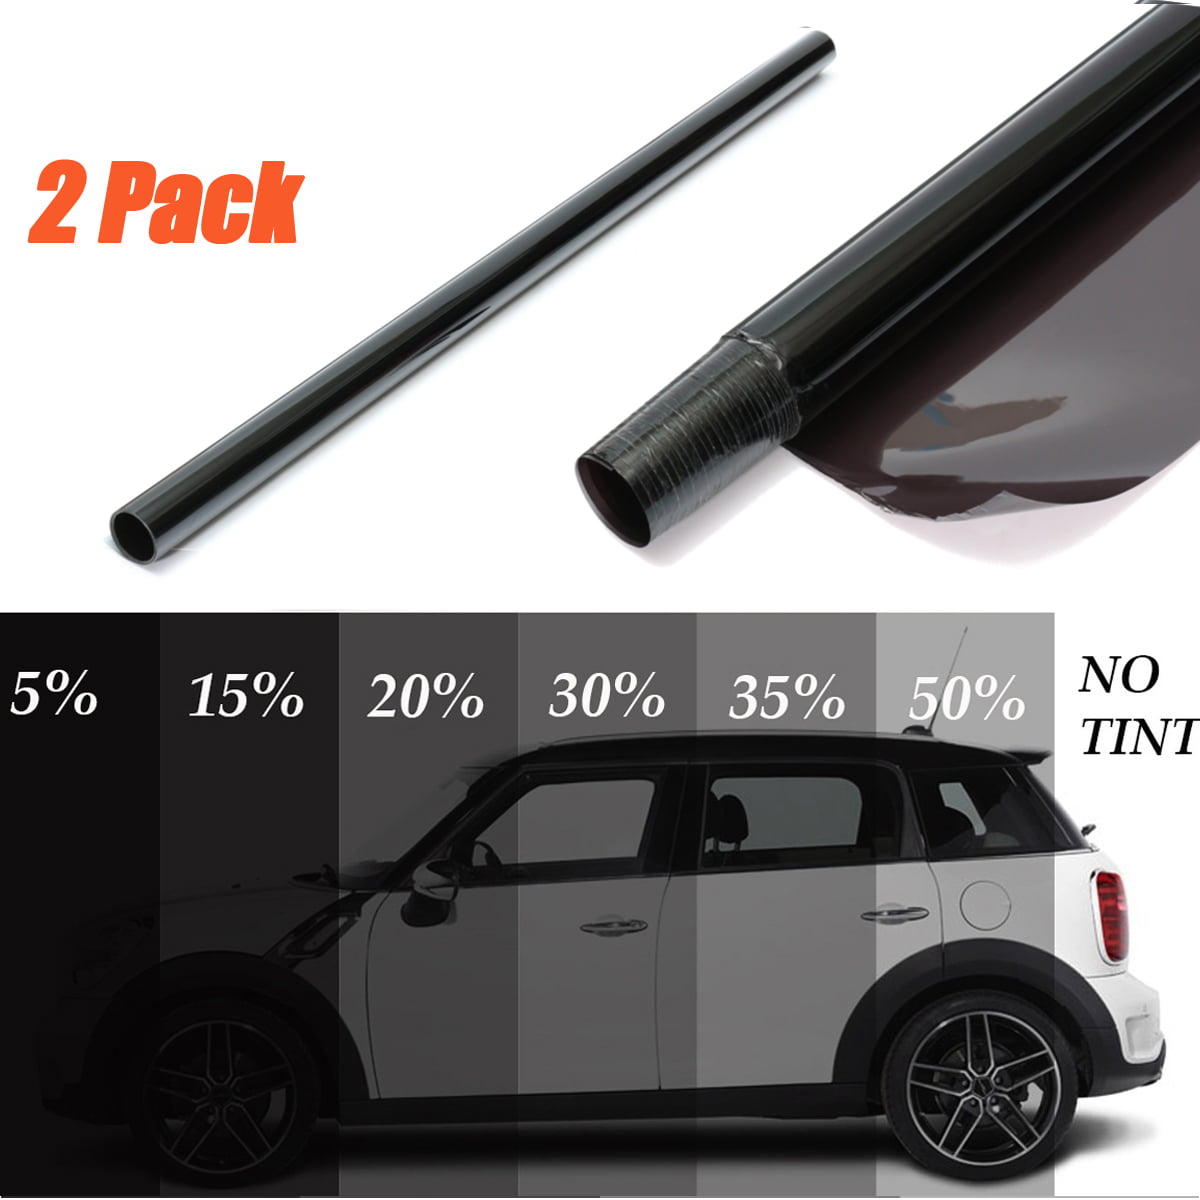 Mkbrother Uncut Roll Window Tint Film 50% VLT 24 in x 5 Ft Feet Car Home Office Glasss 